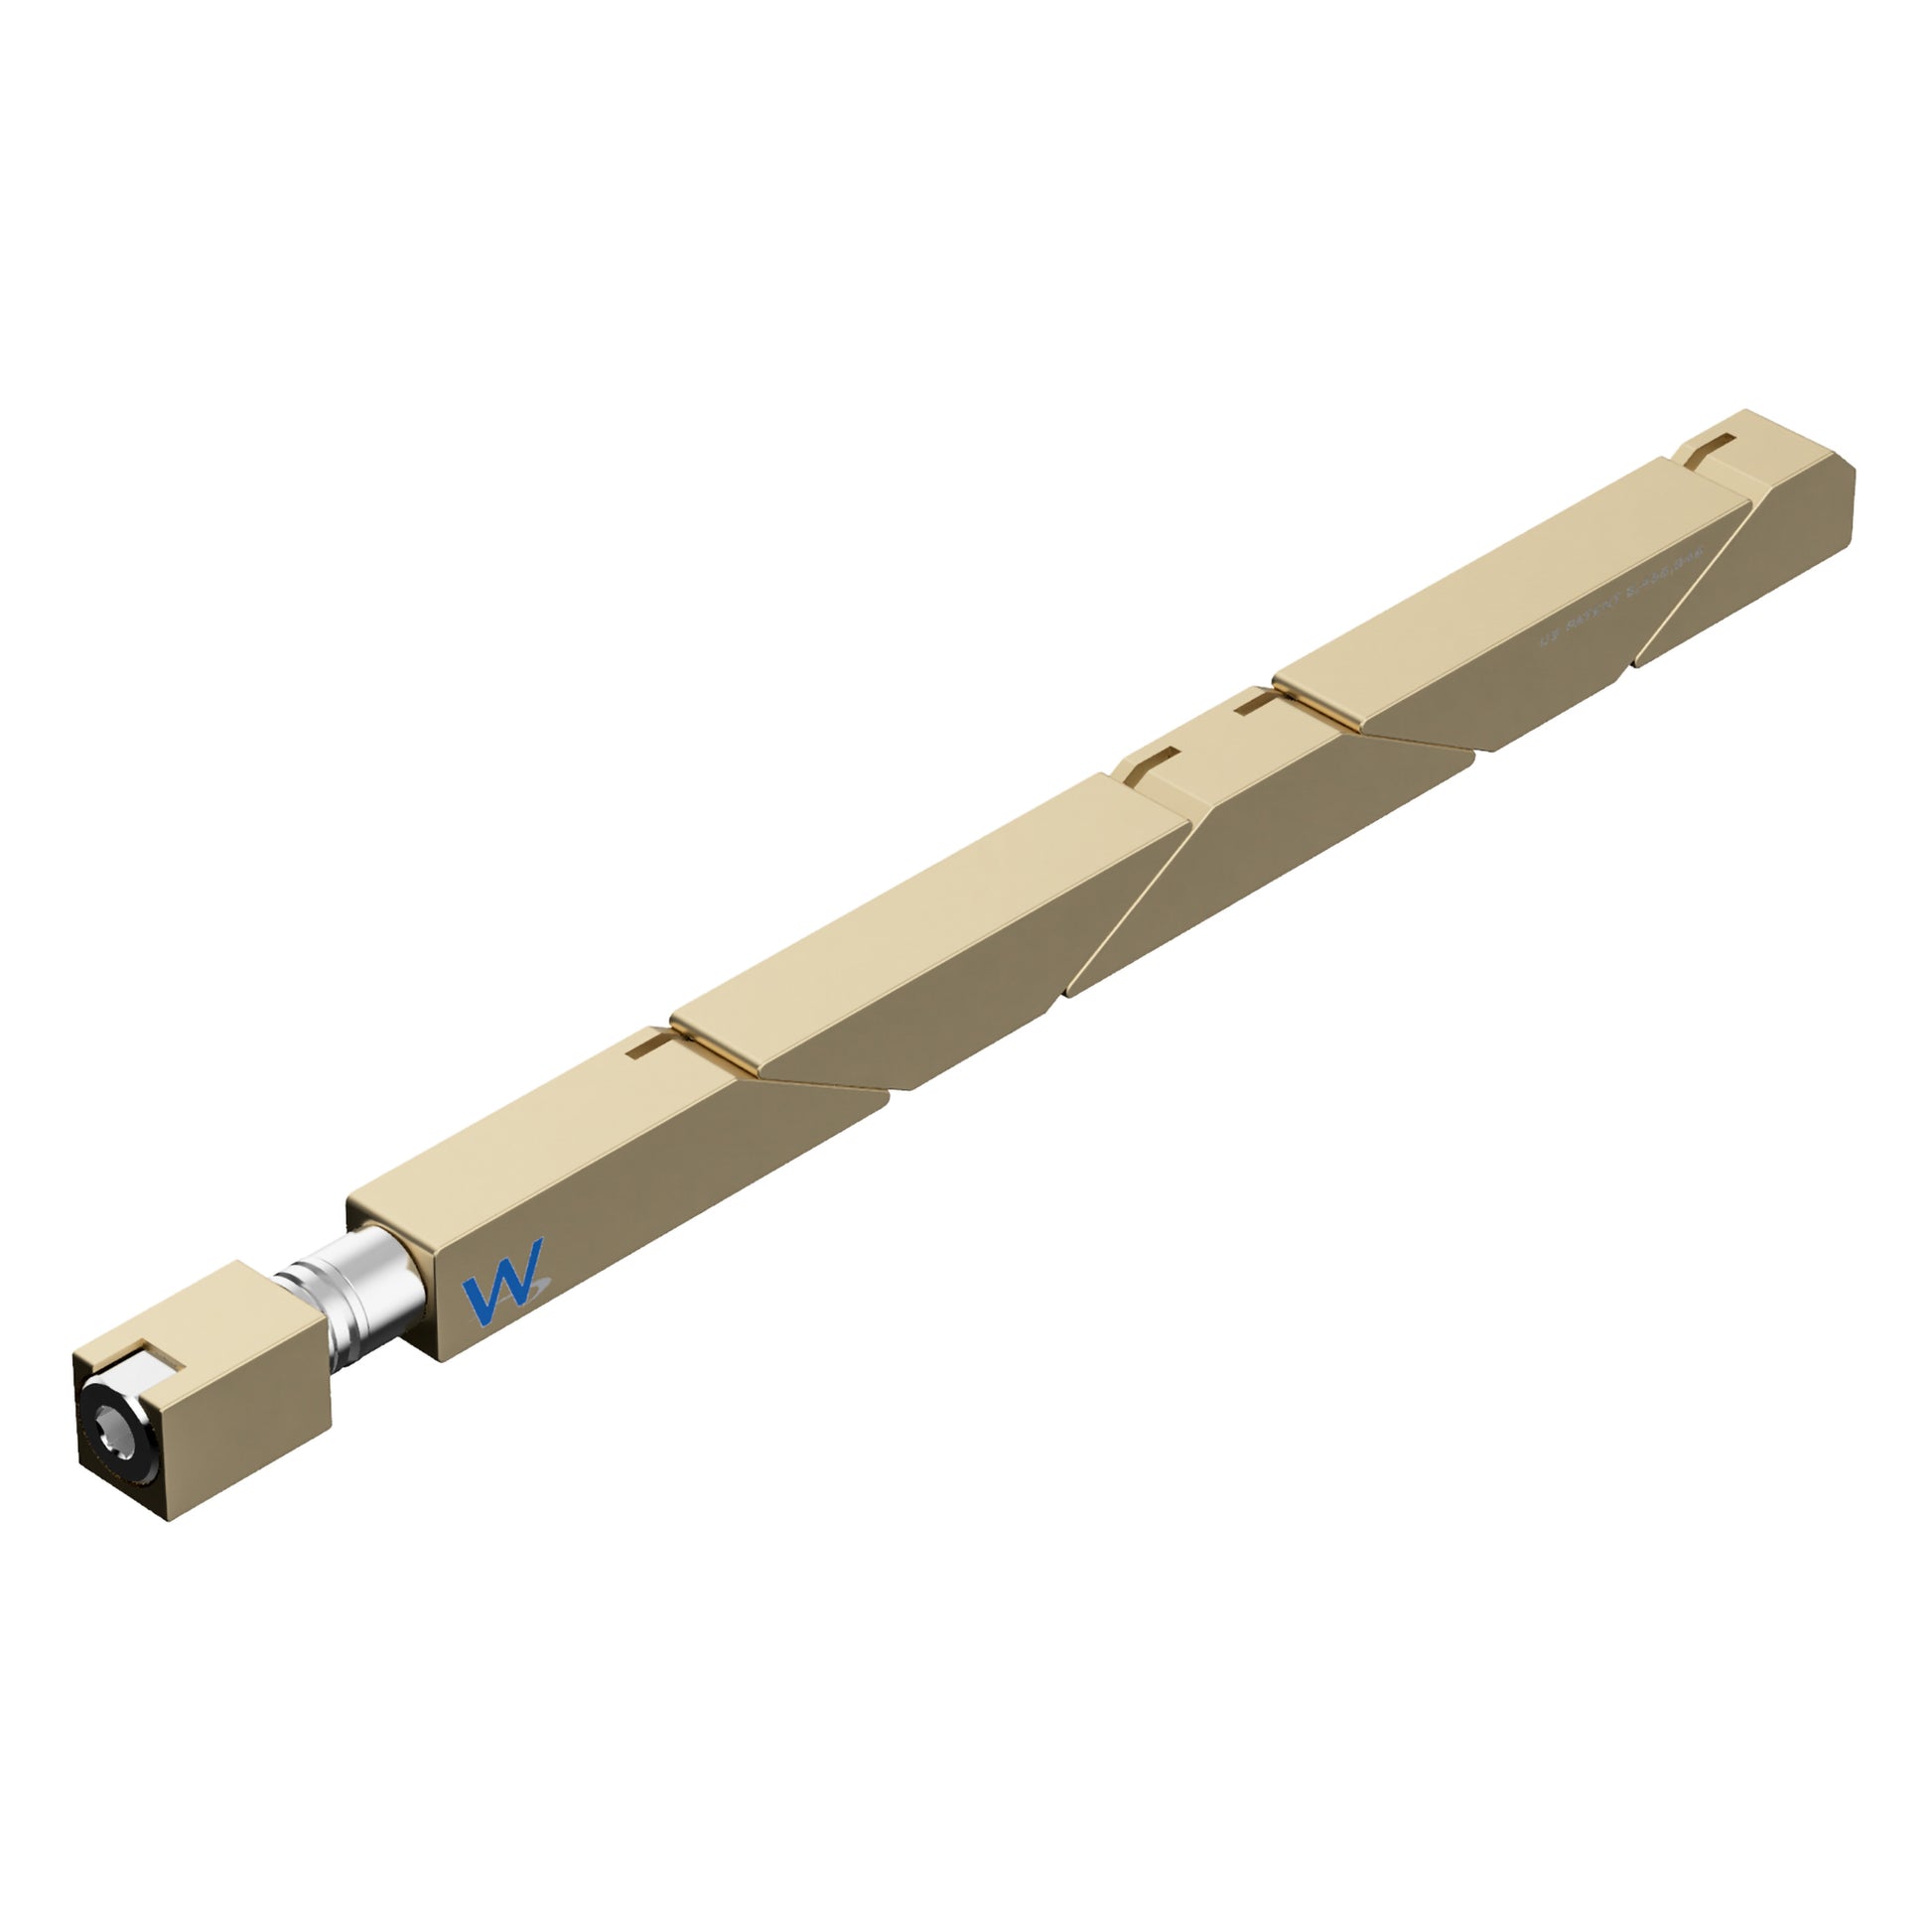 SW5-43-270-250 Max Force Wedgelock, segmented long rectulangular hardware component, Gold Chemical Film Finish